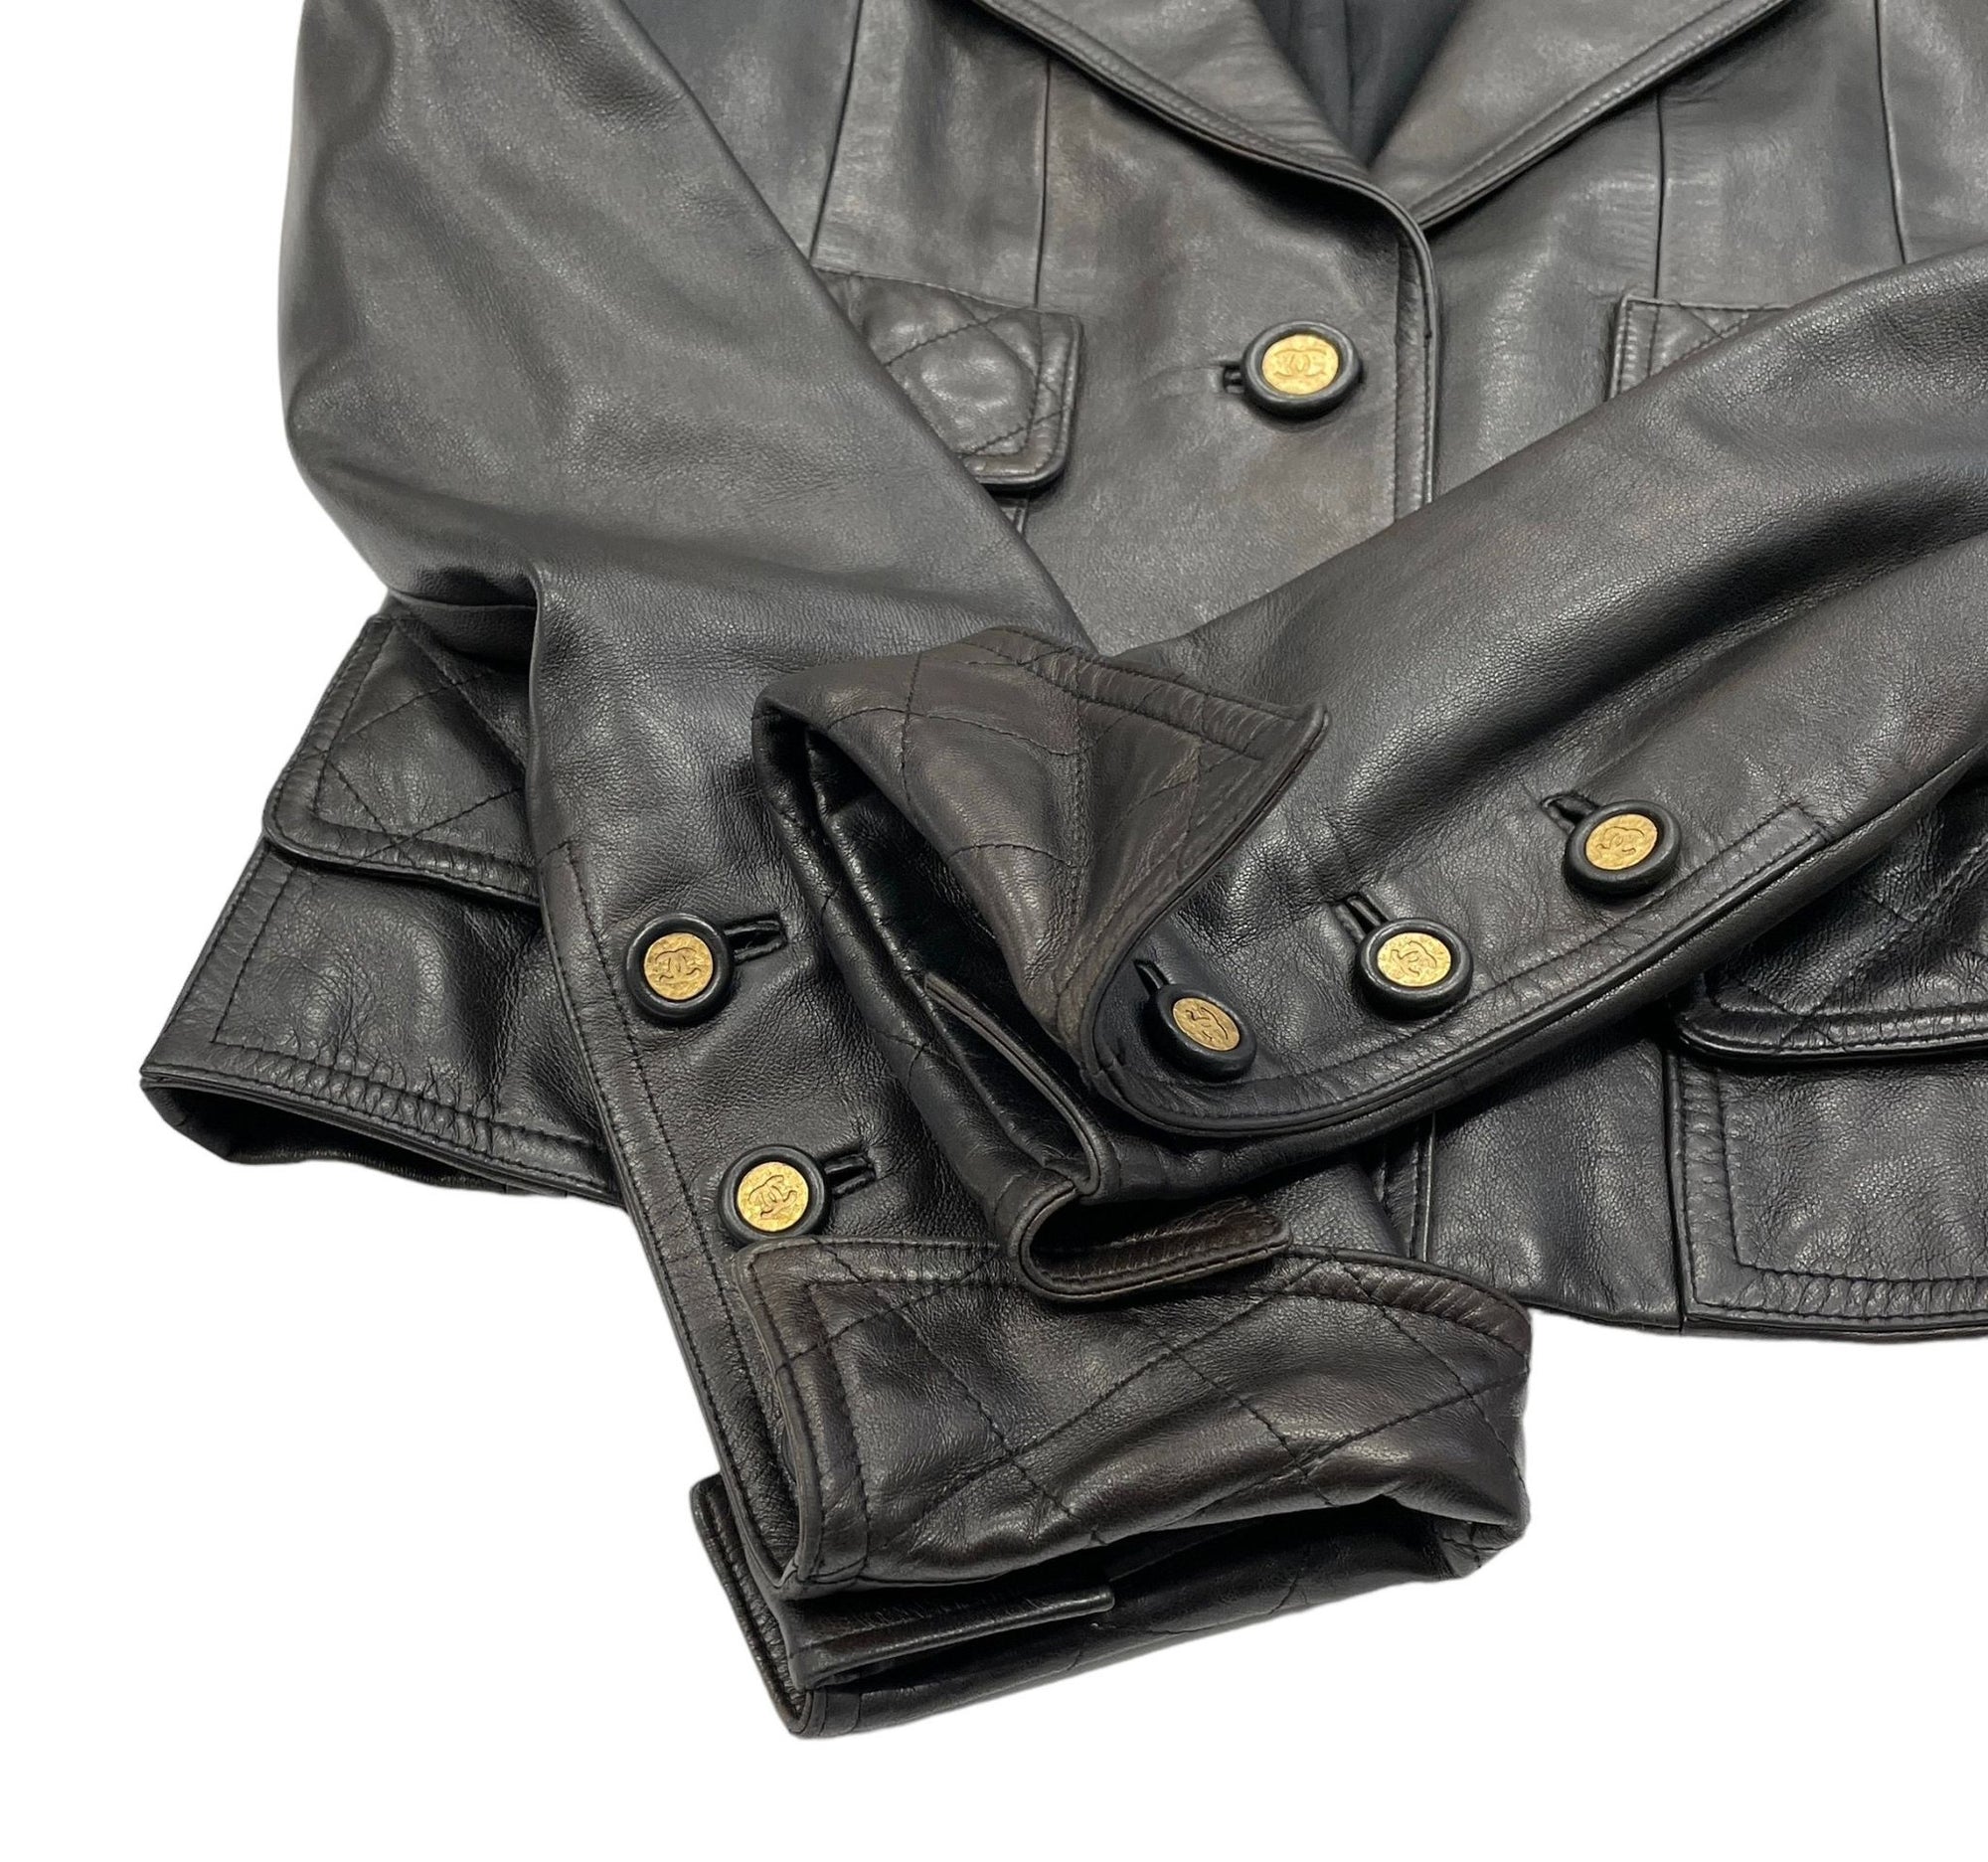 Chanel Quilted Leather Bomber Jacket — UFO No More